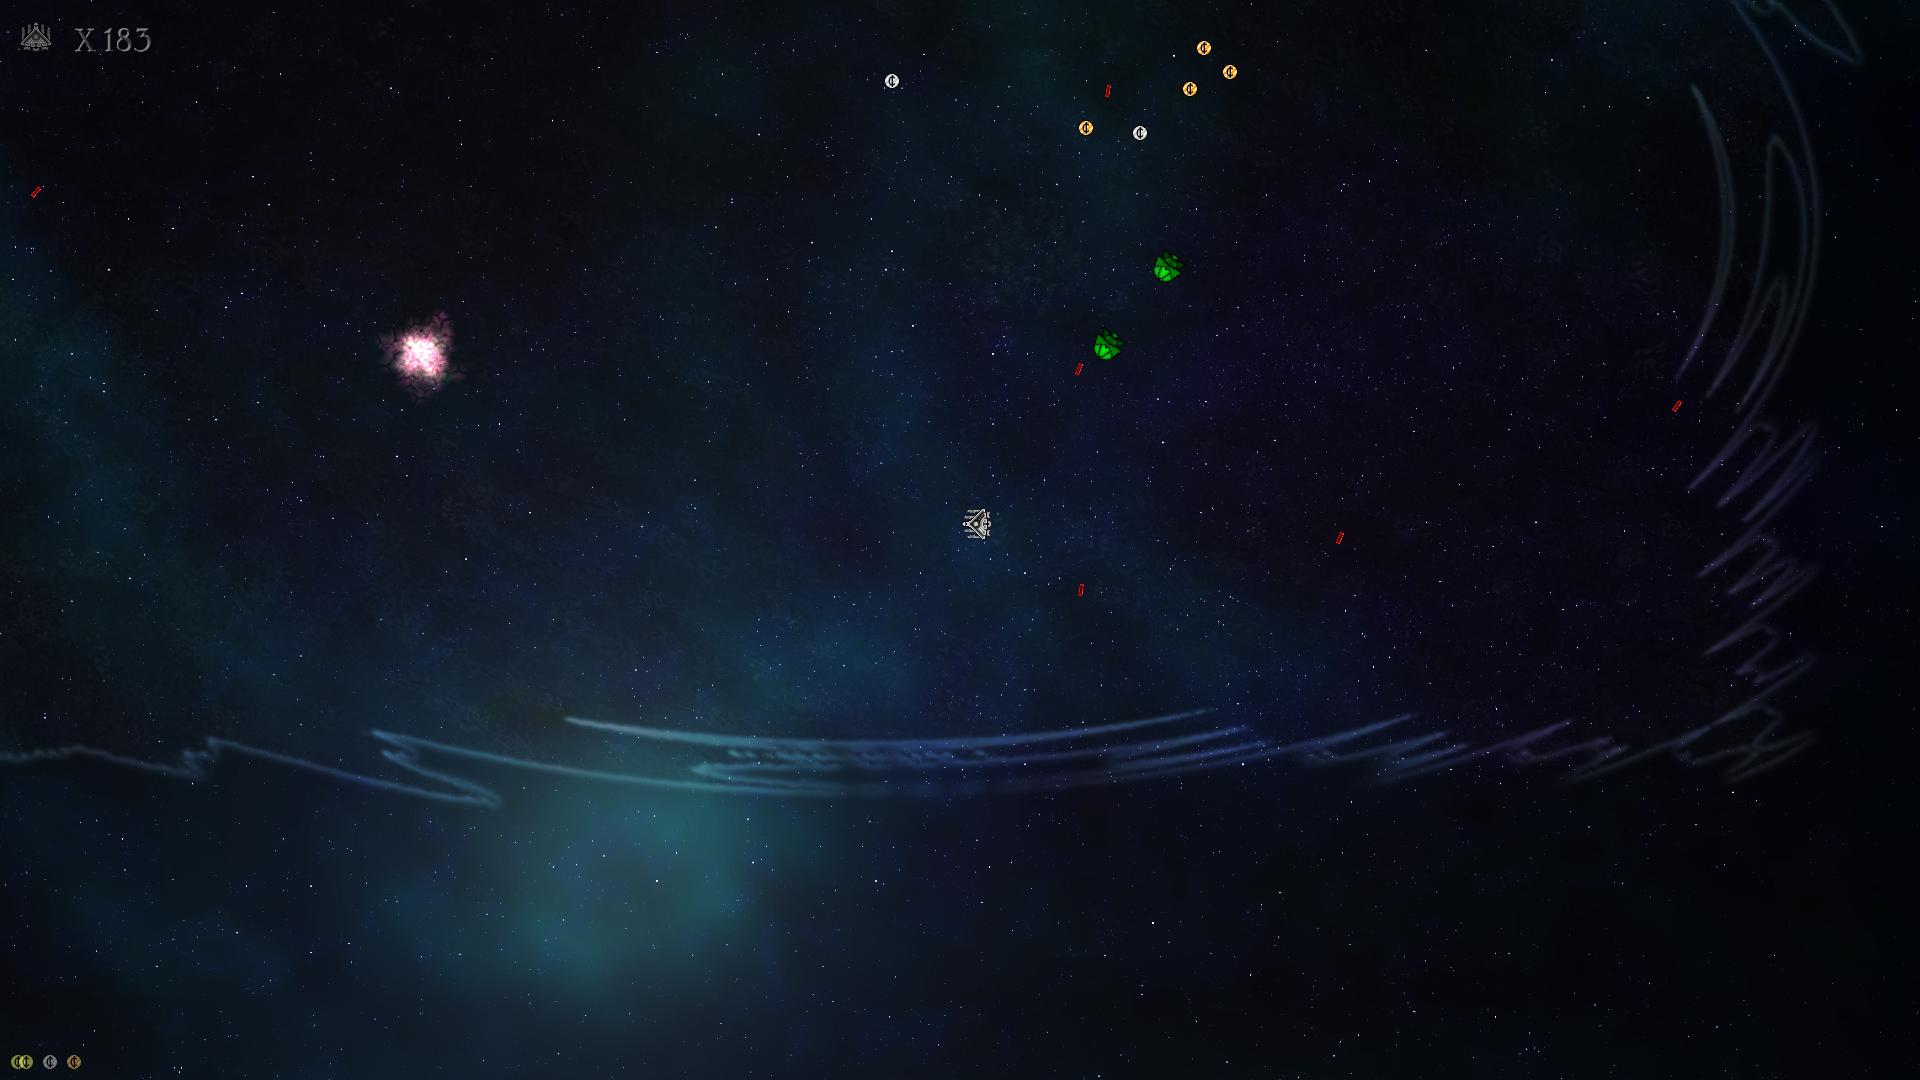 space game browser